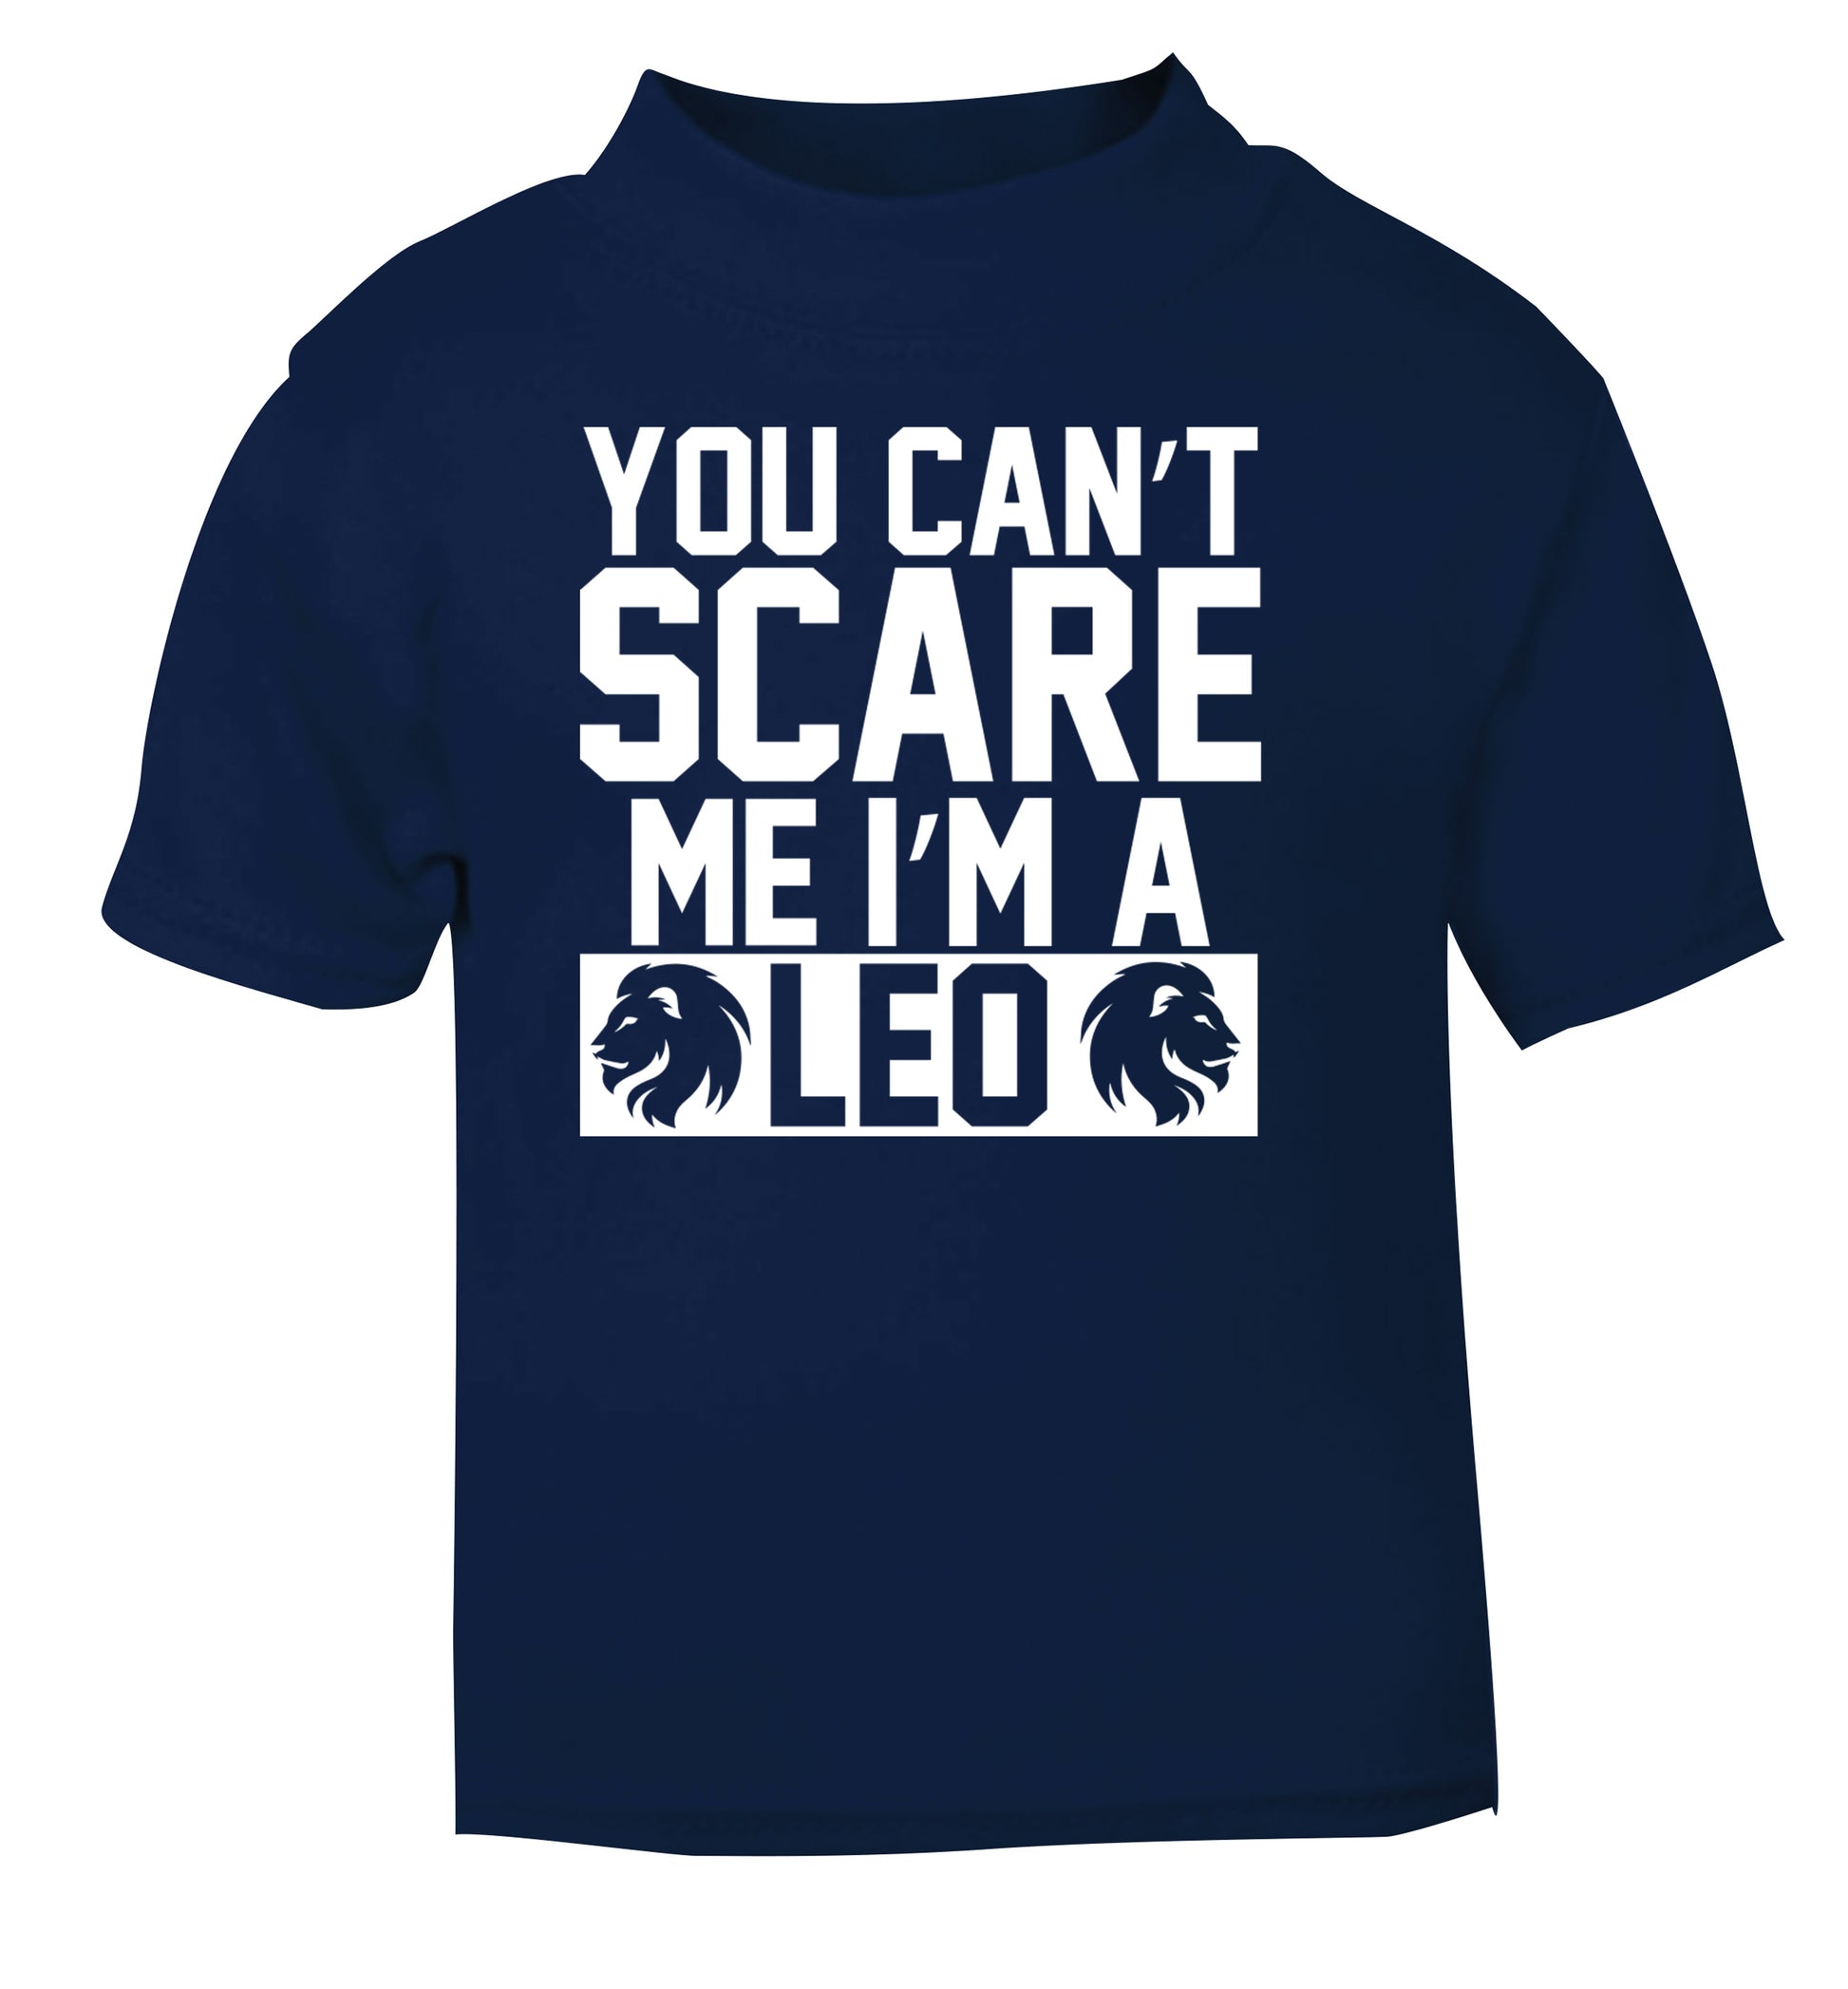 You can't scare me I'm a leo navy Baby Toddler Tshirt 2 Years